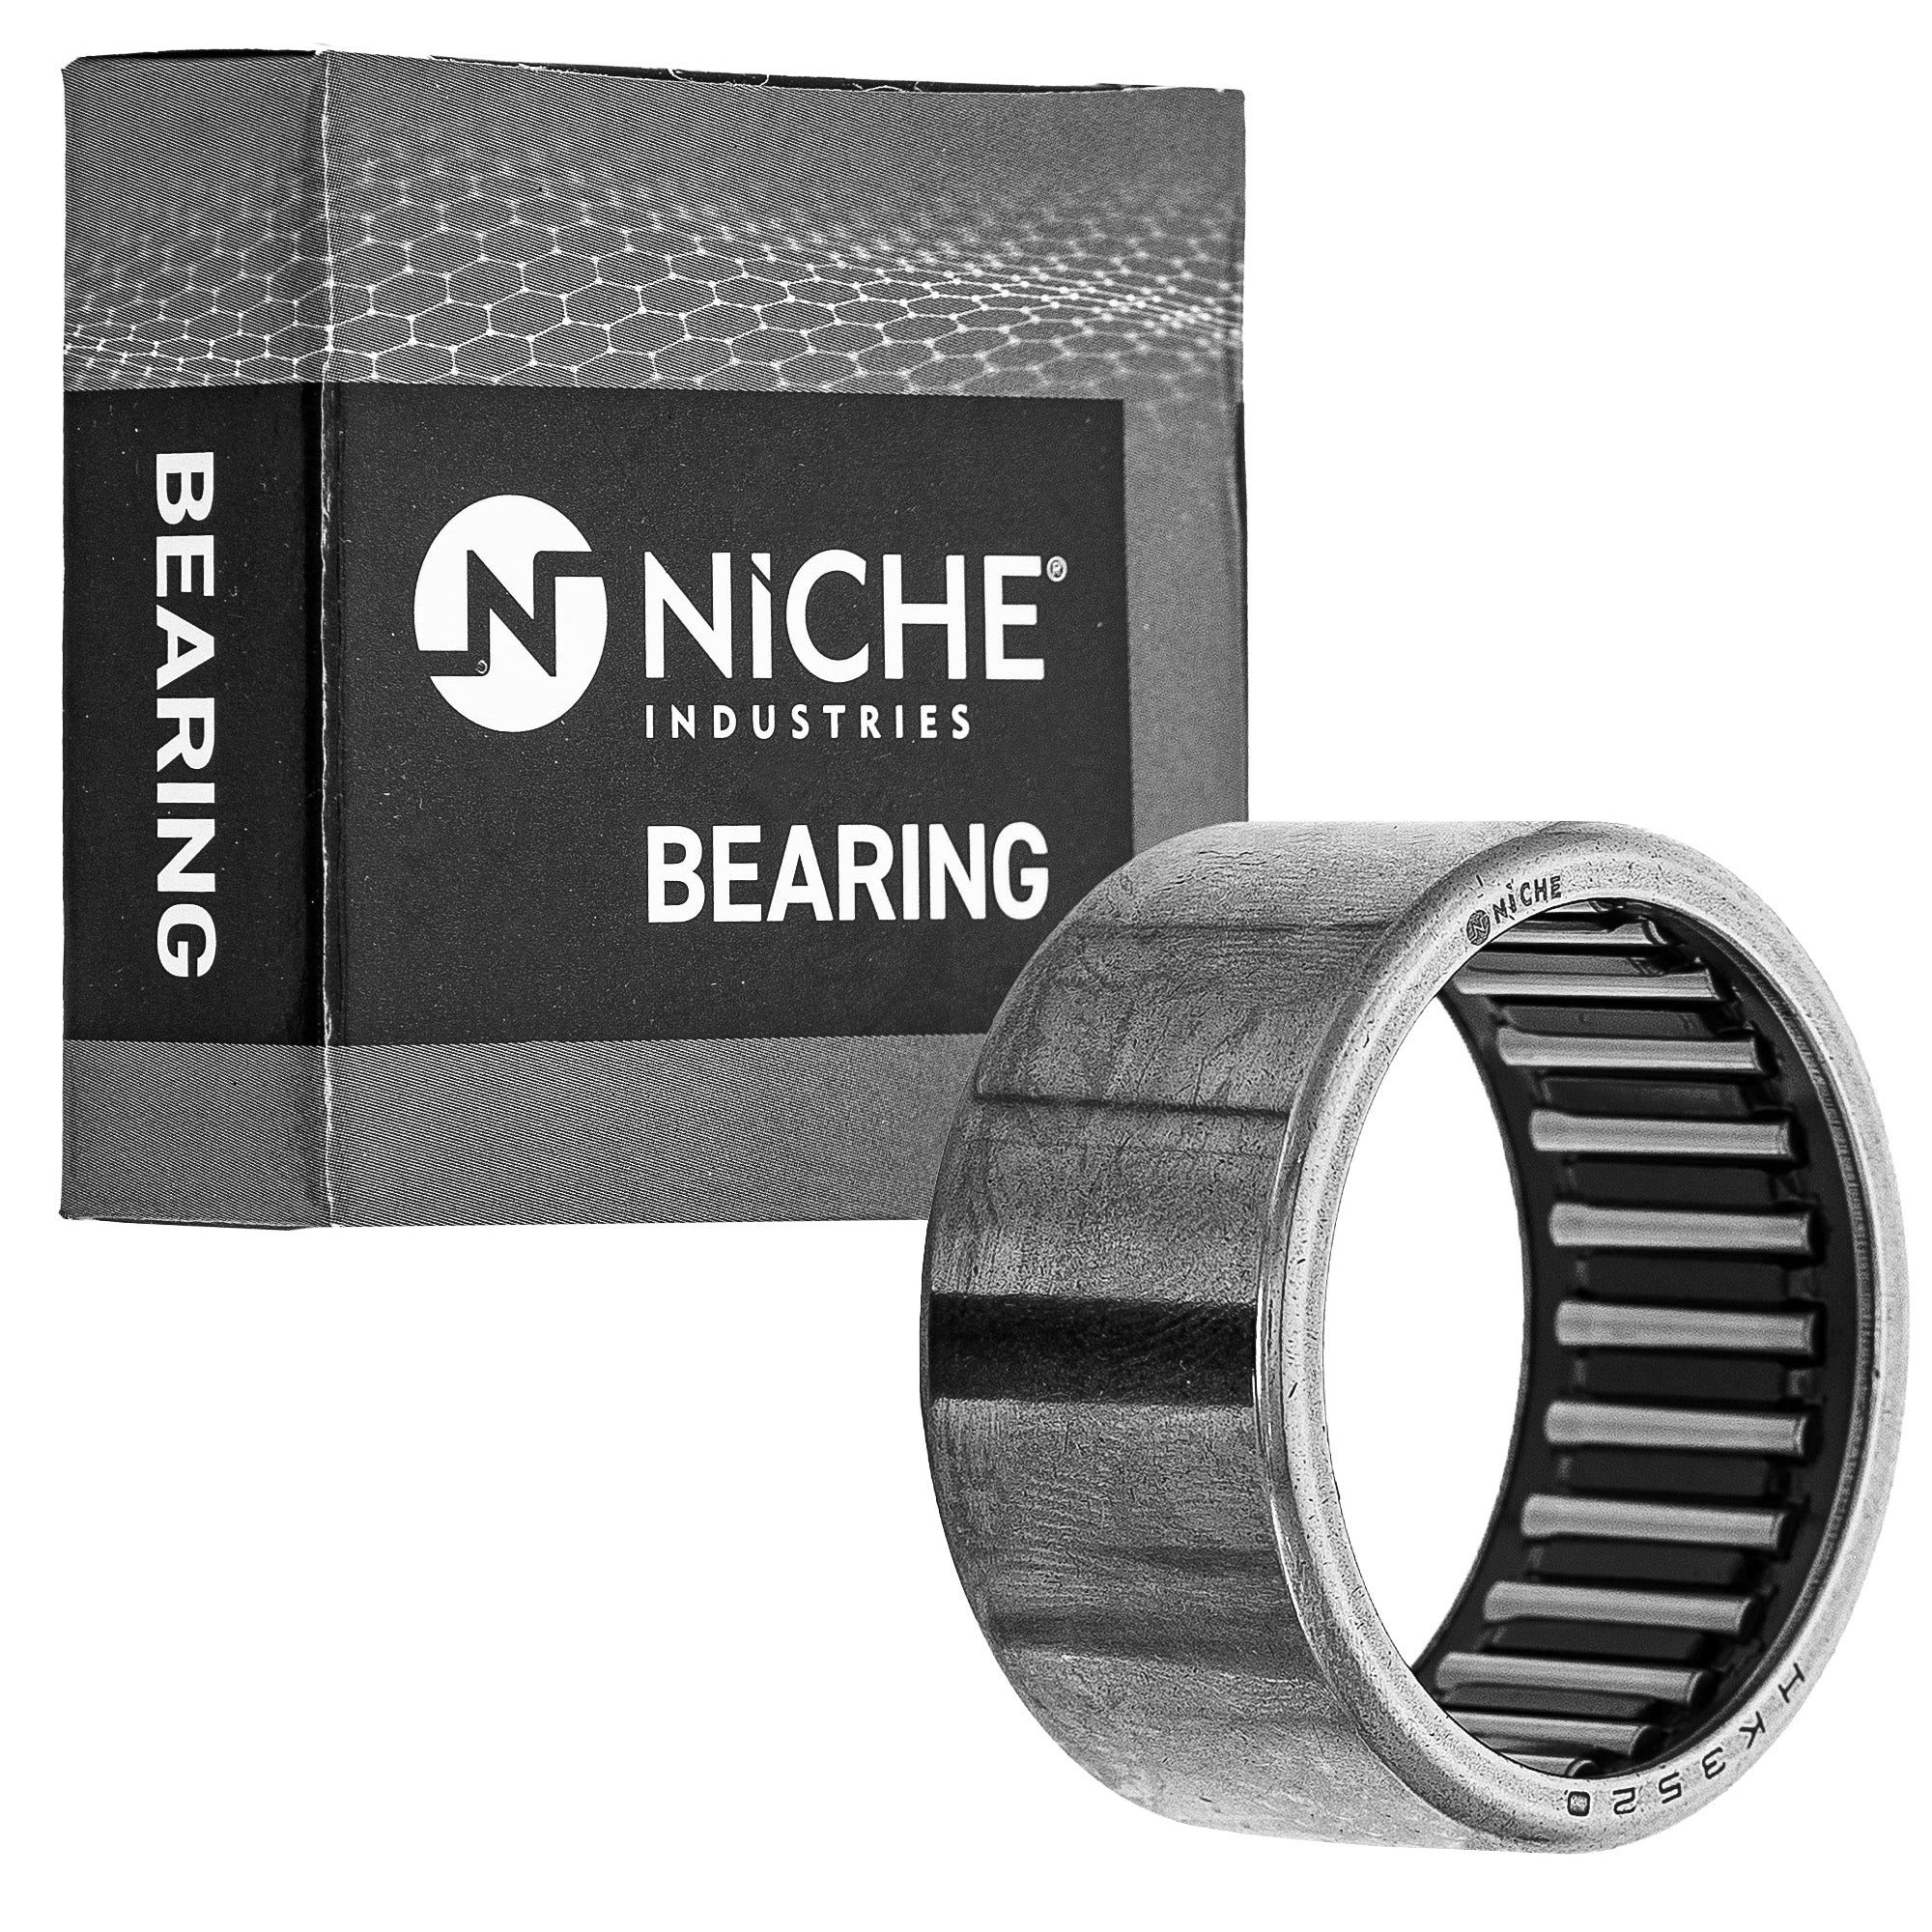 NICHE 519-CBB2294R Bearing 10-Pack for zOTHER YZF FZ1